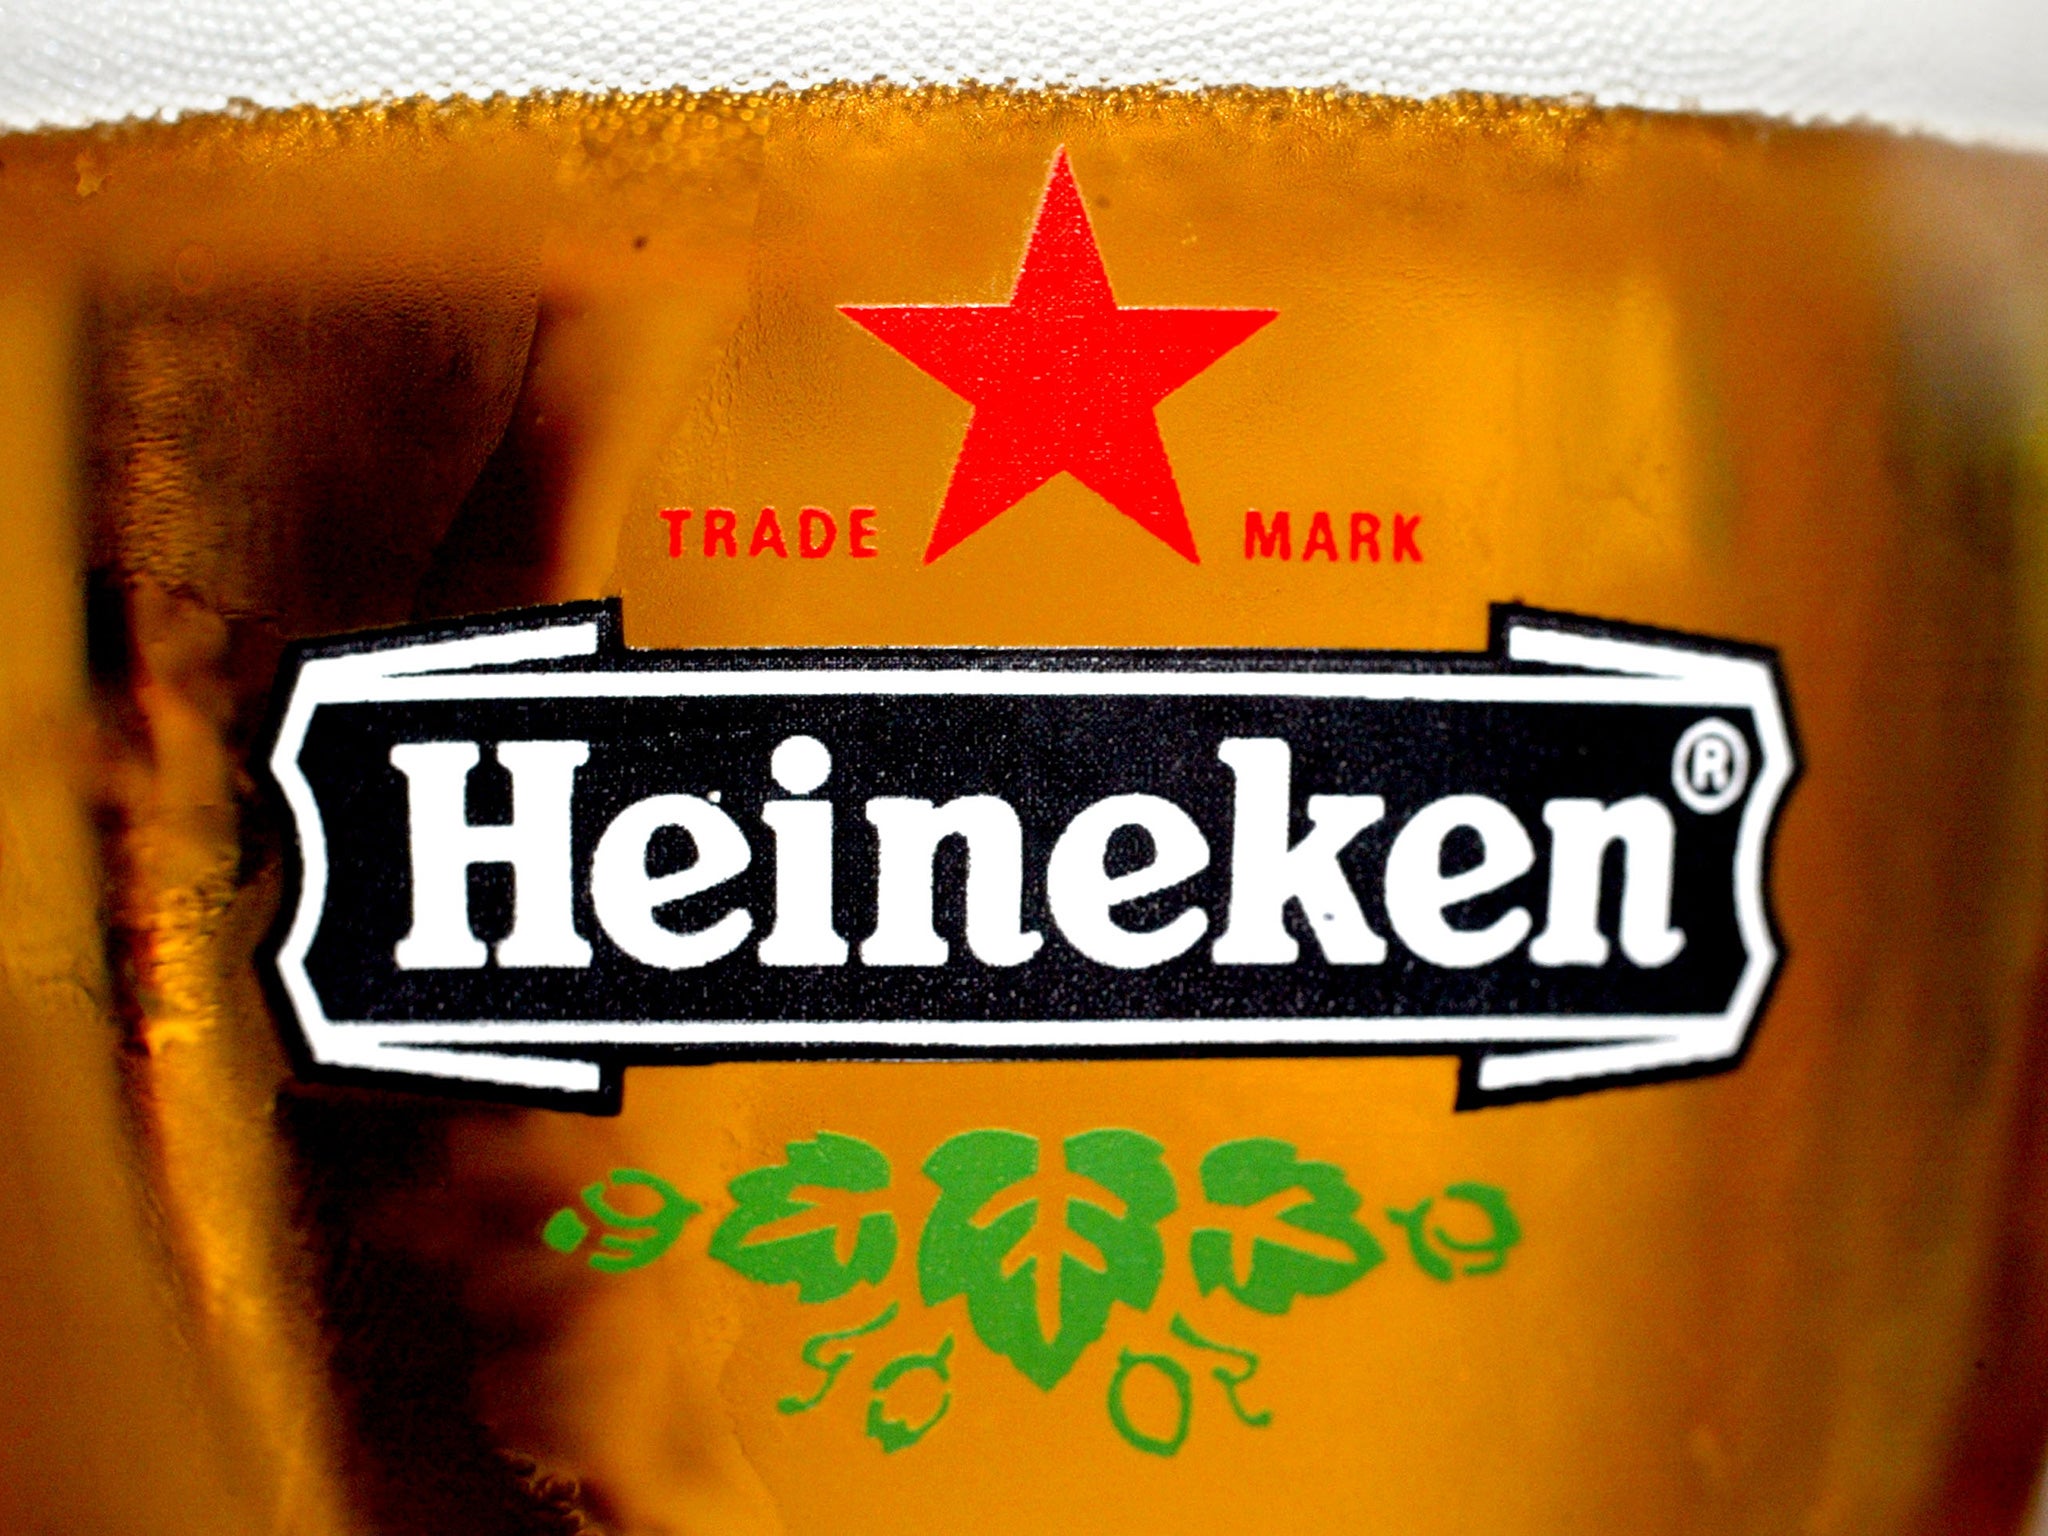 The Budapest government accused Heineken of bullying a small, partly ethnic-Hungarian owned brewer in neighbouring Romania